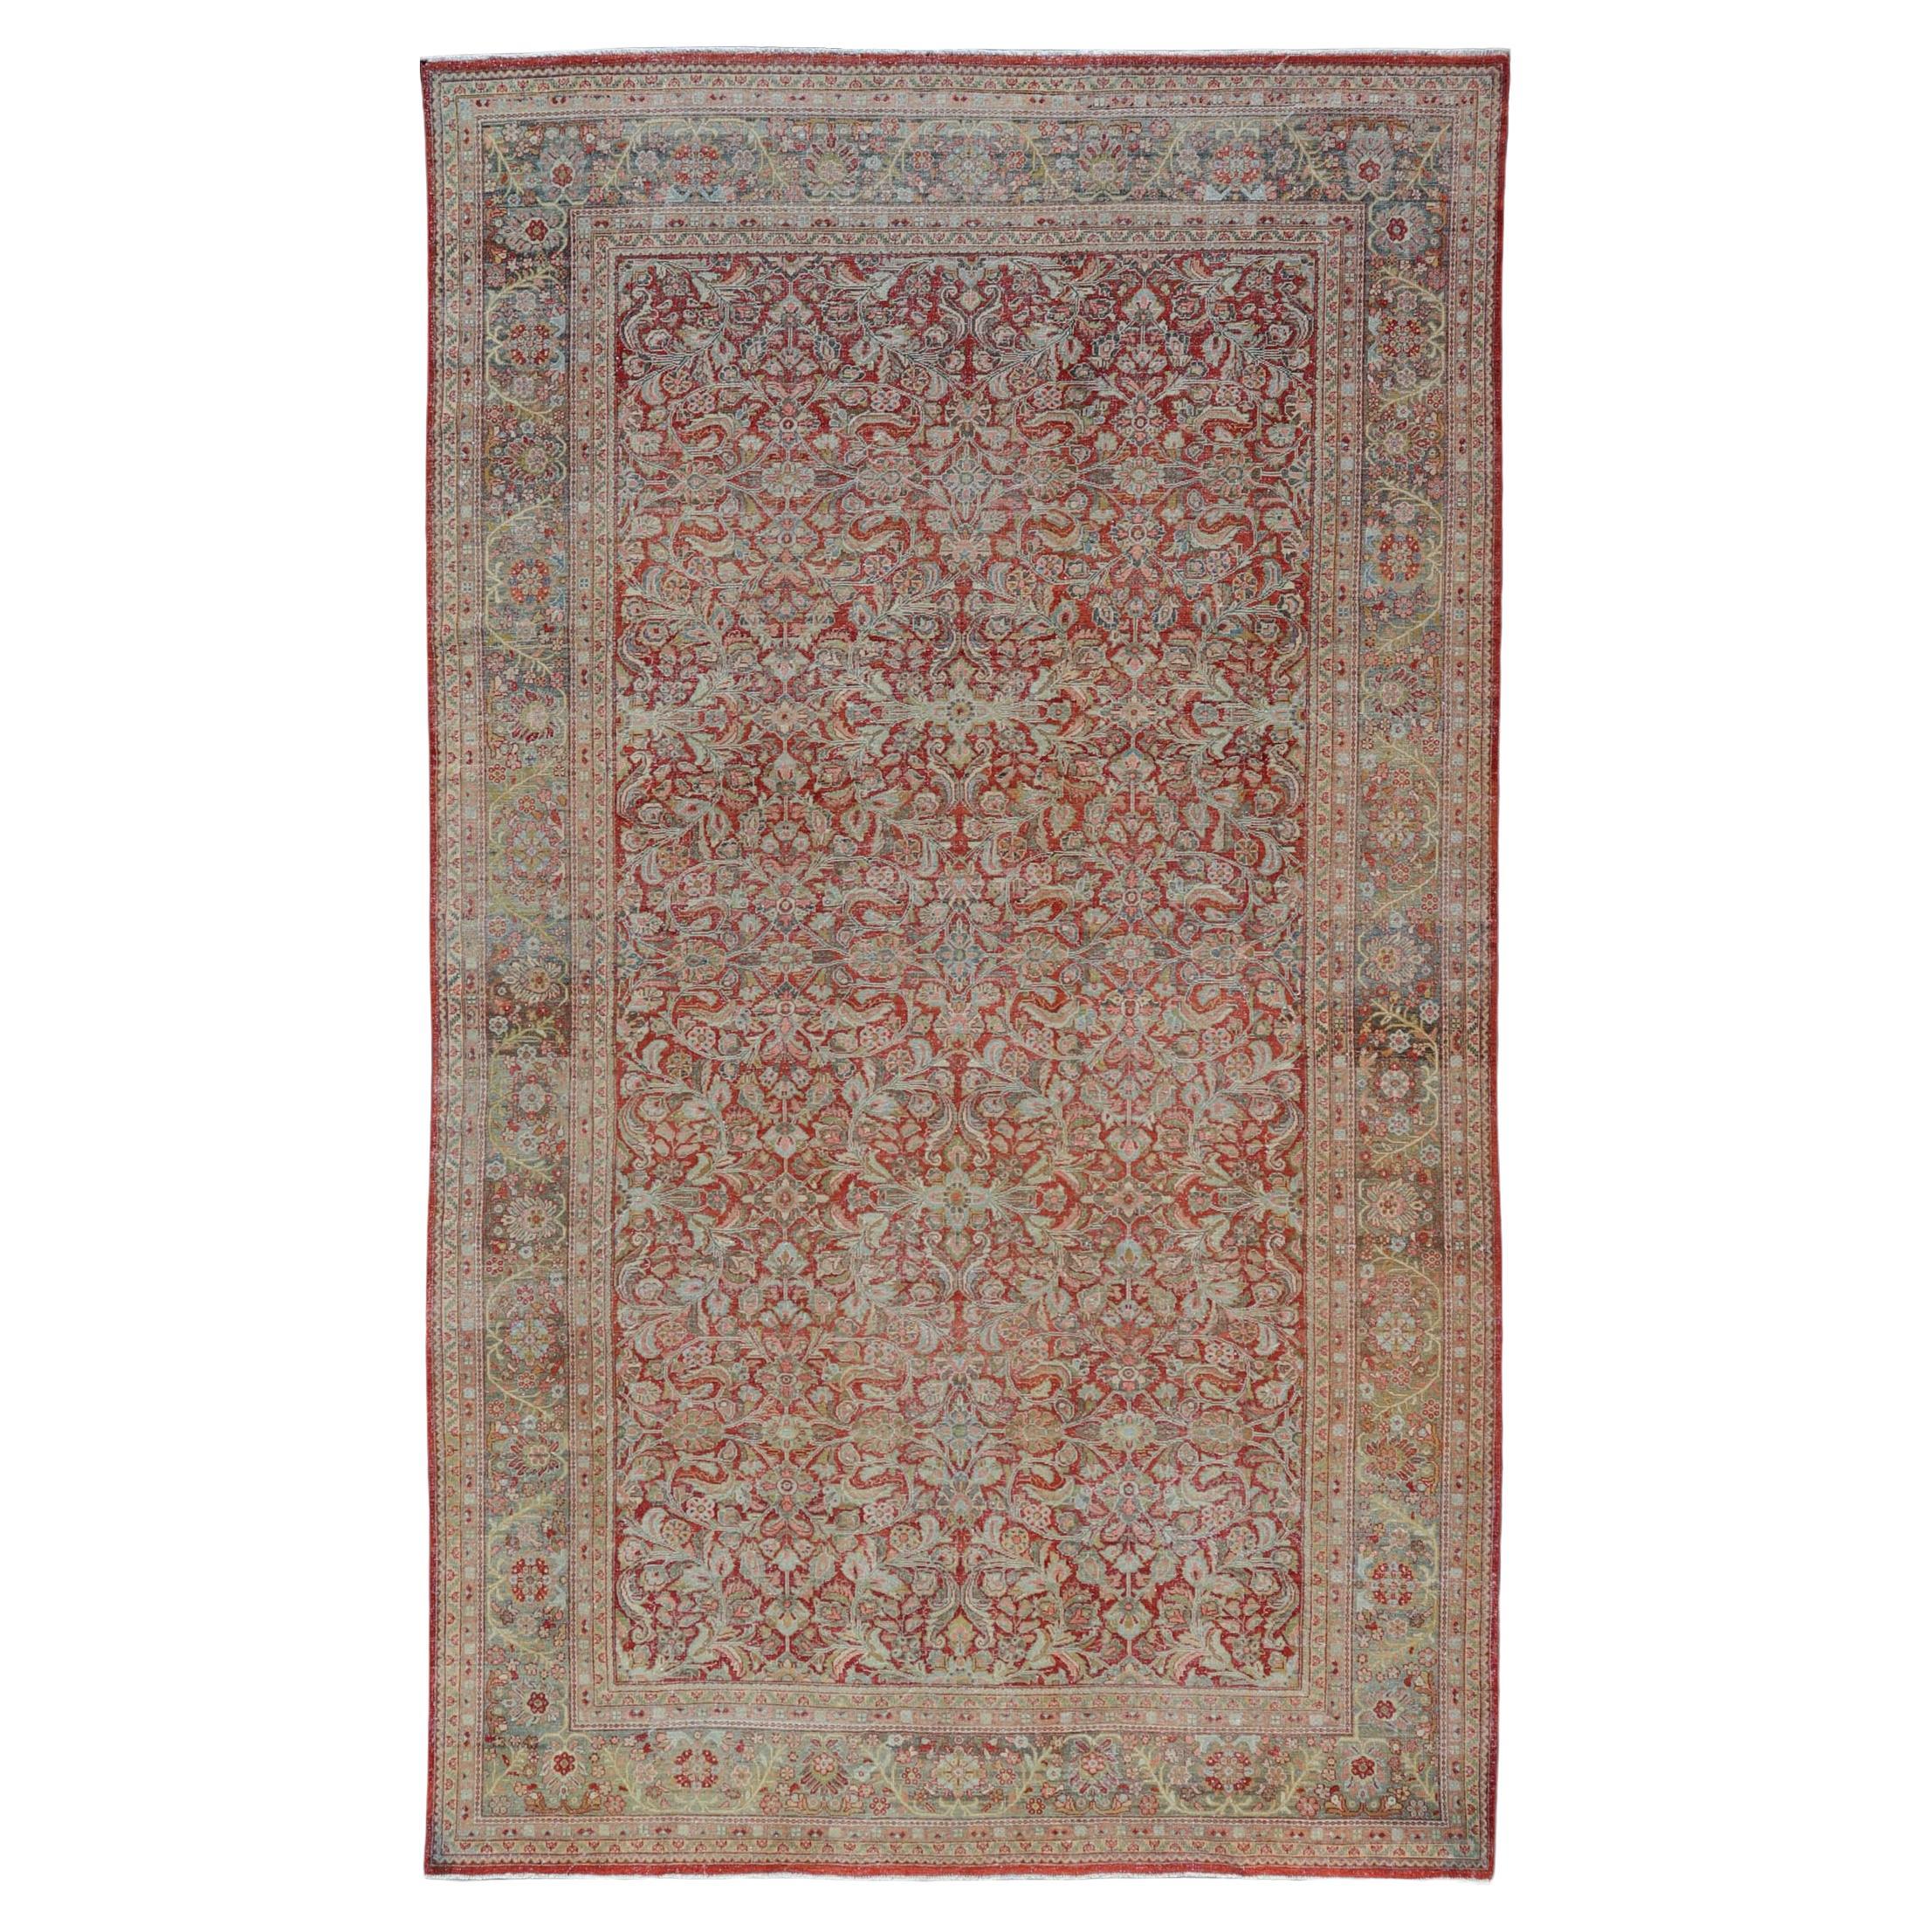 Antique Large Persian Colorful Sultanabad Mahal Rug with All Over Floral Design For Sale